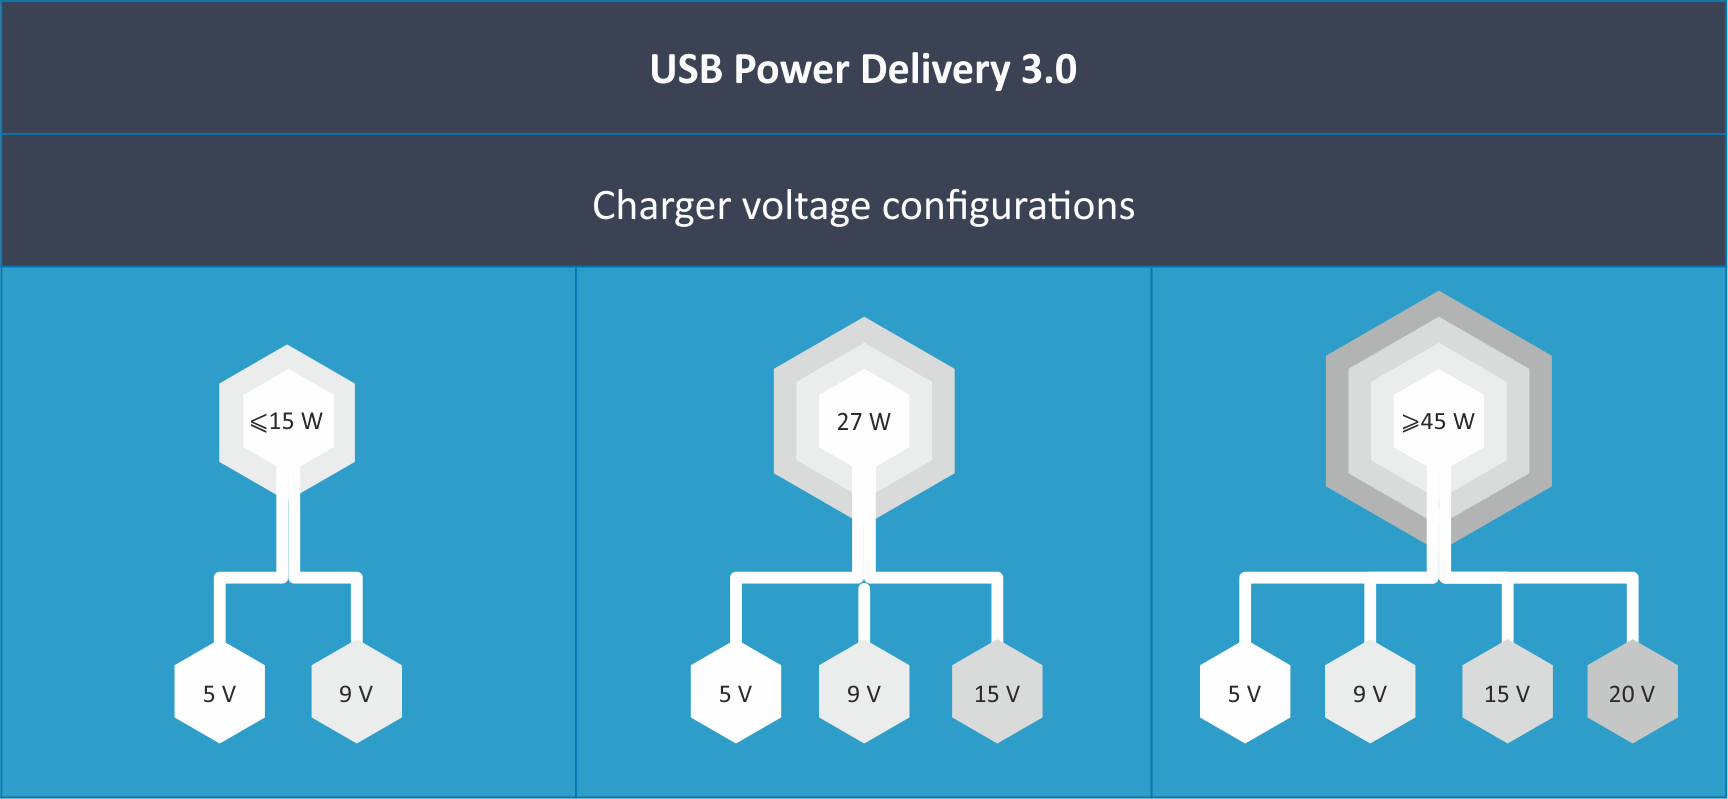 table with the configuration of USB Power Delivery 3.0 voltages